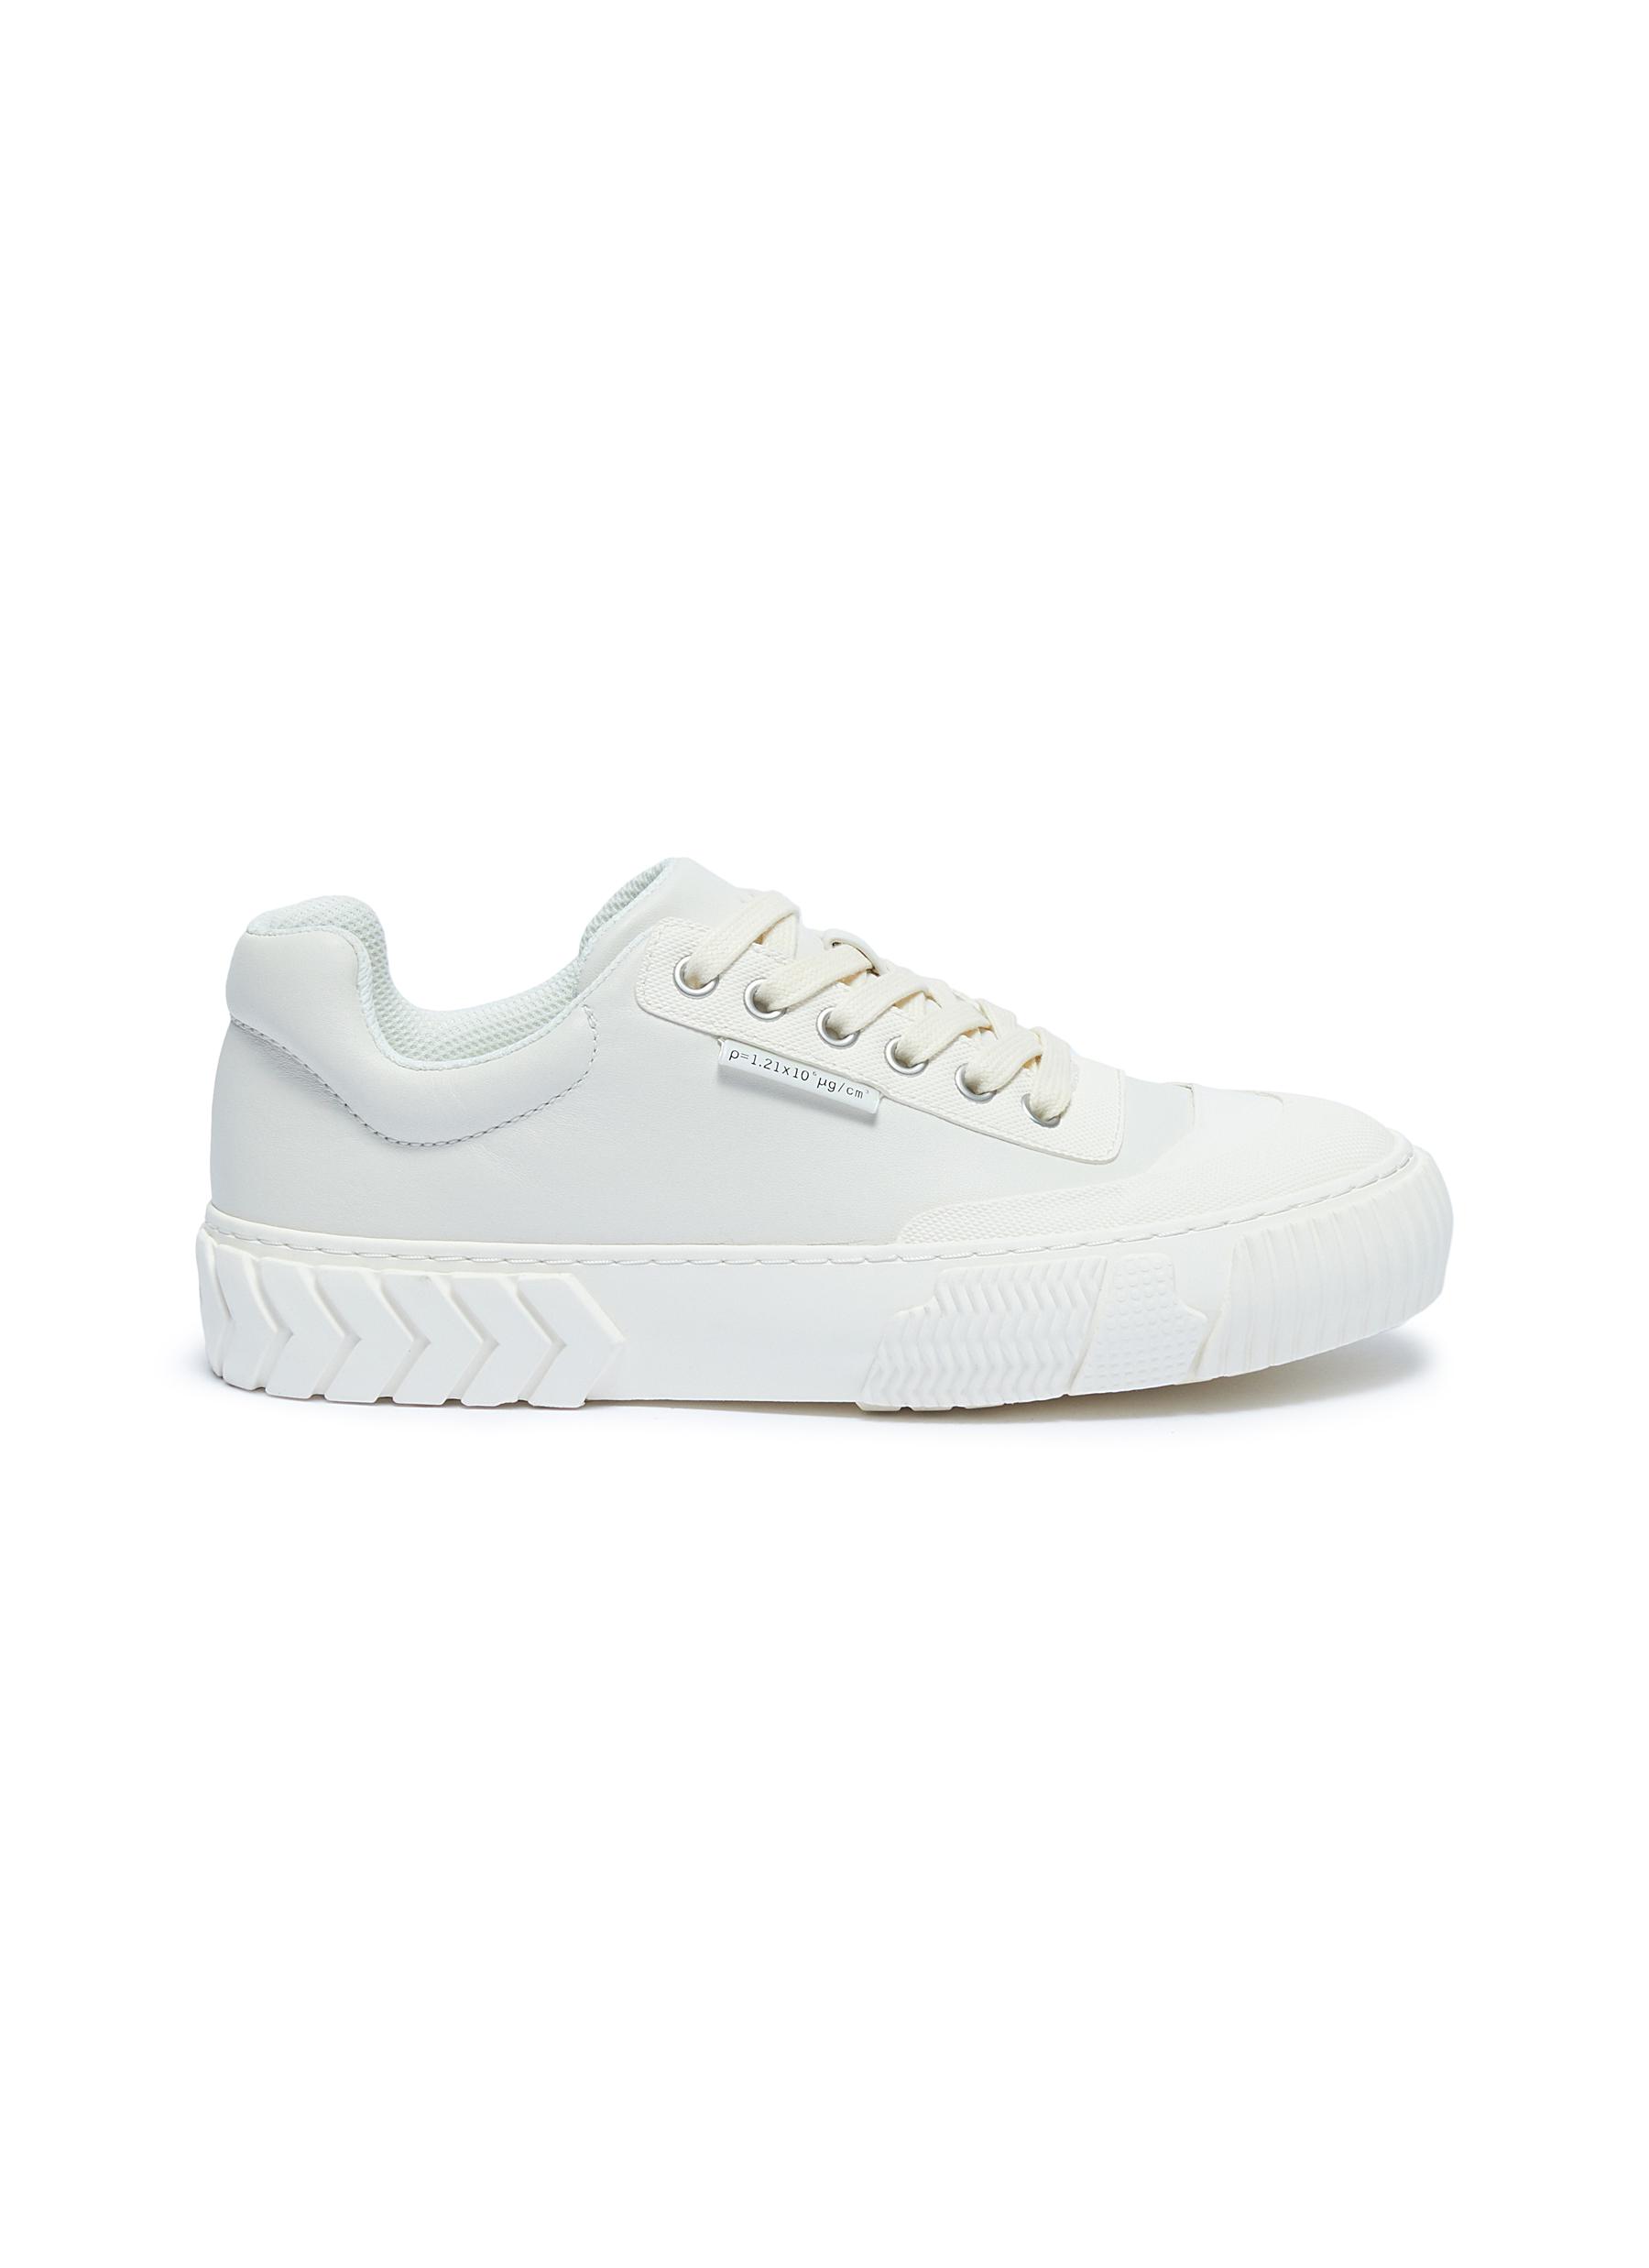 Both 'skate Broken C' Rubber Panel Leather Sneakers In White / Grey ...